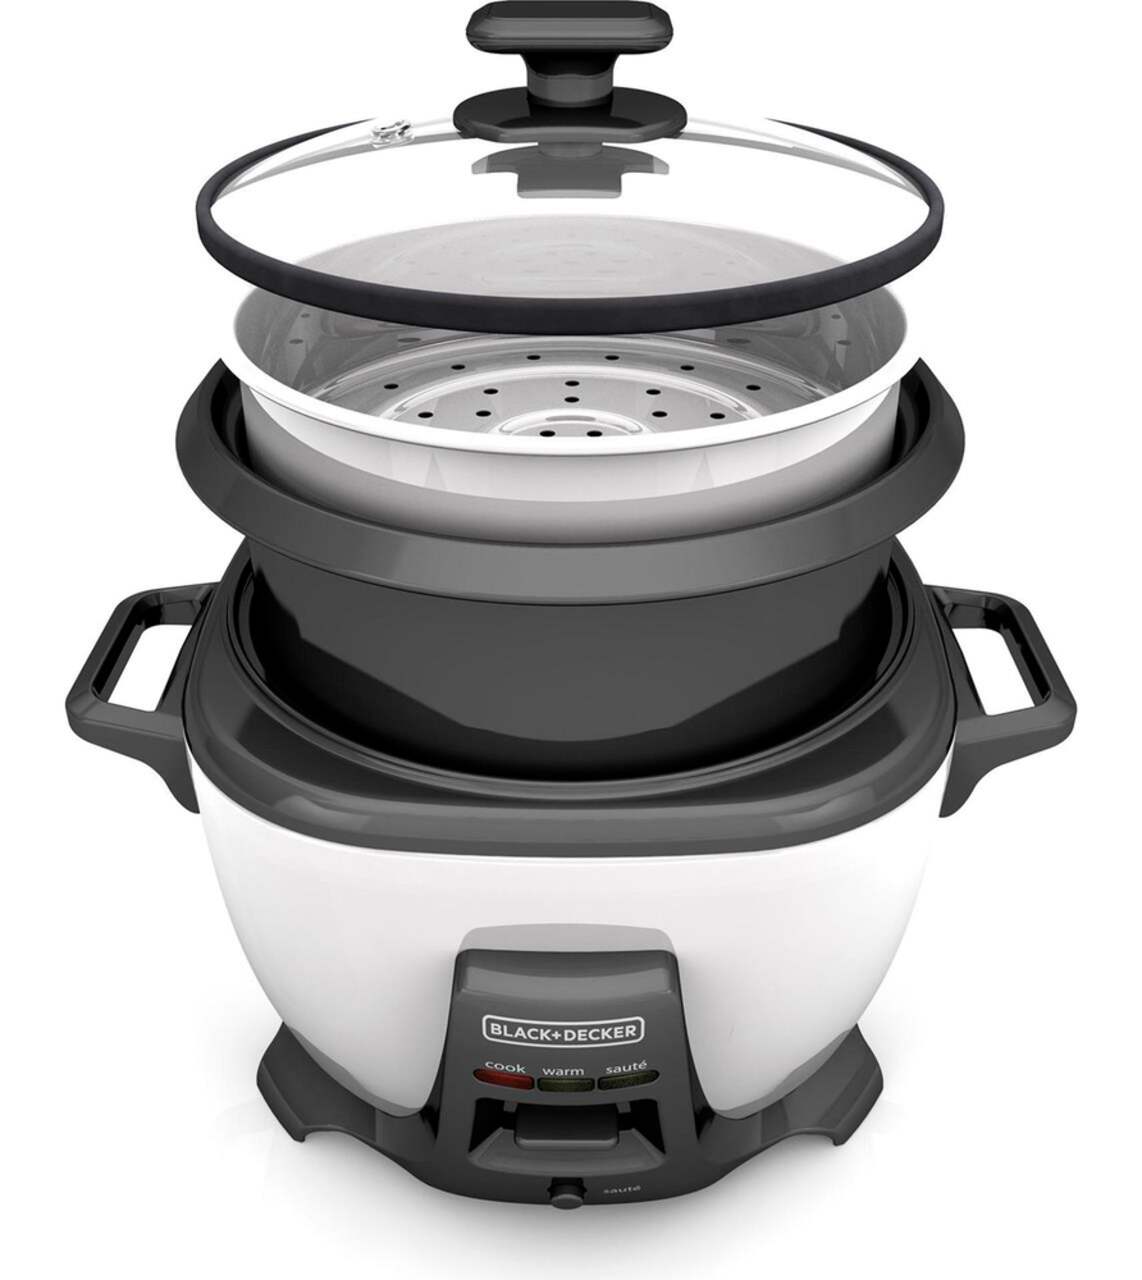 Canadian Tire - SAVE 50% on the 16-Cup Black & Decker Non-Stick Rice Cooker  and pay only $24.99. This rice cooker features a non-stick cooking bowl for  easier cleaning and tempered glass